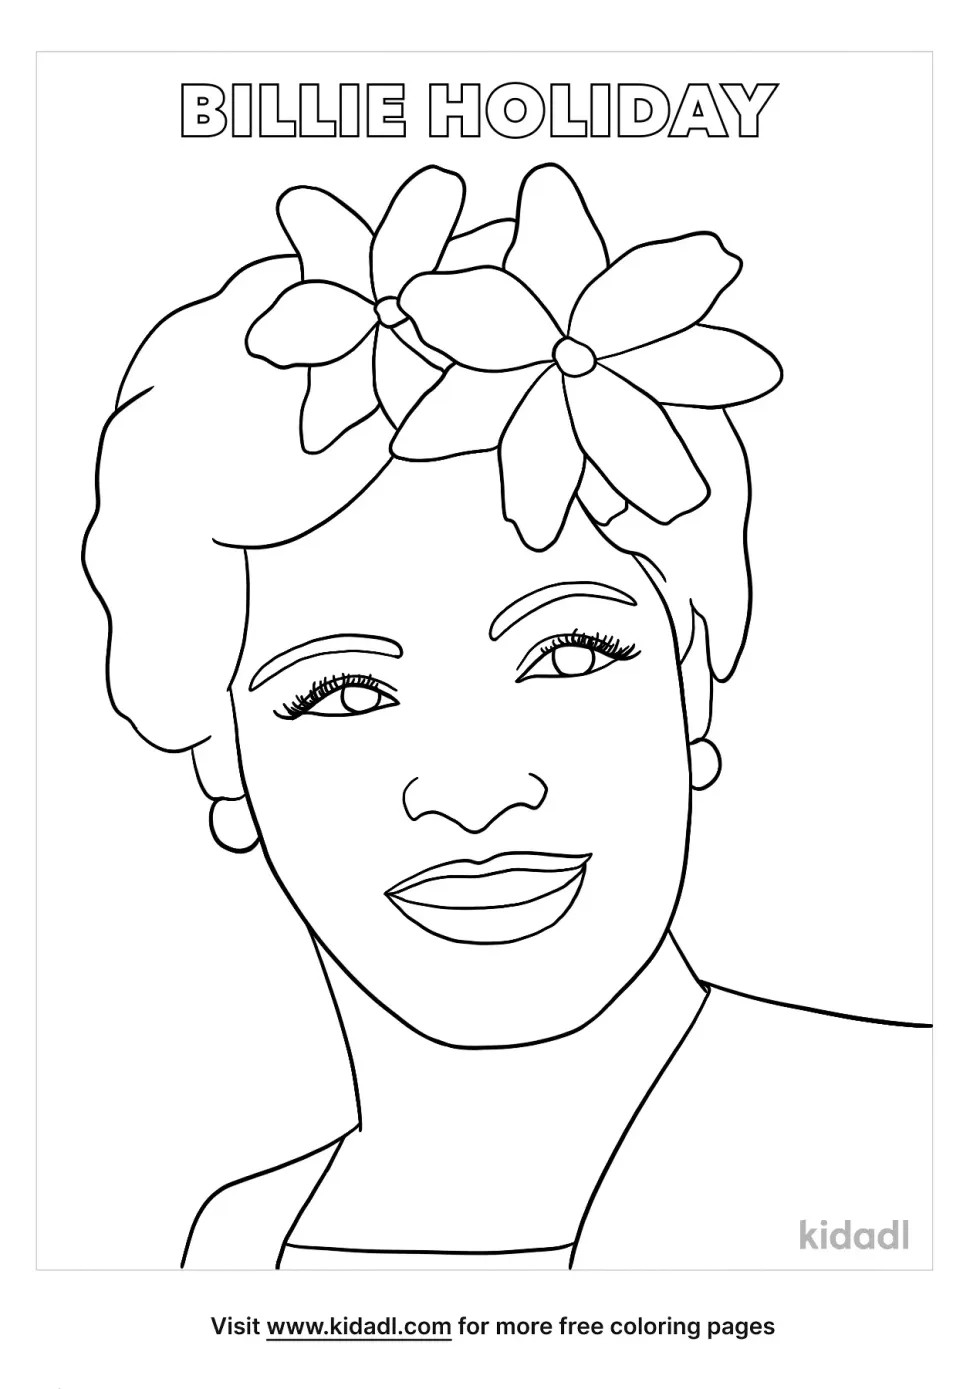 Billie Holiday Coloring Page